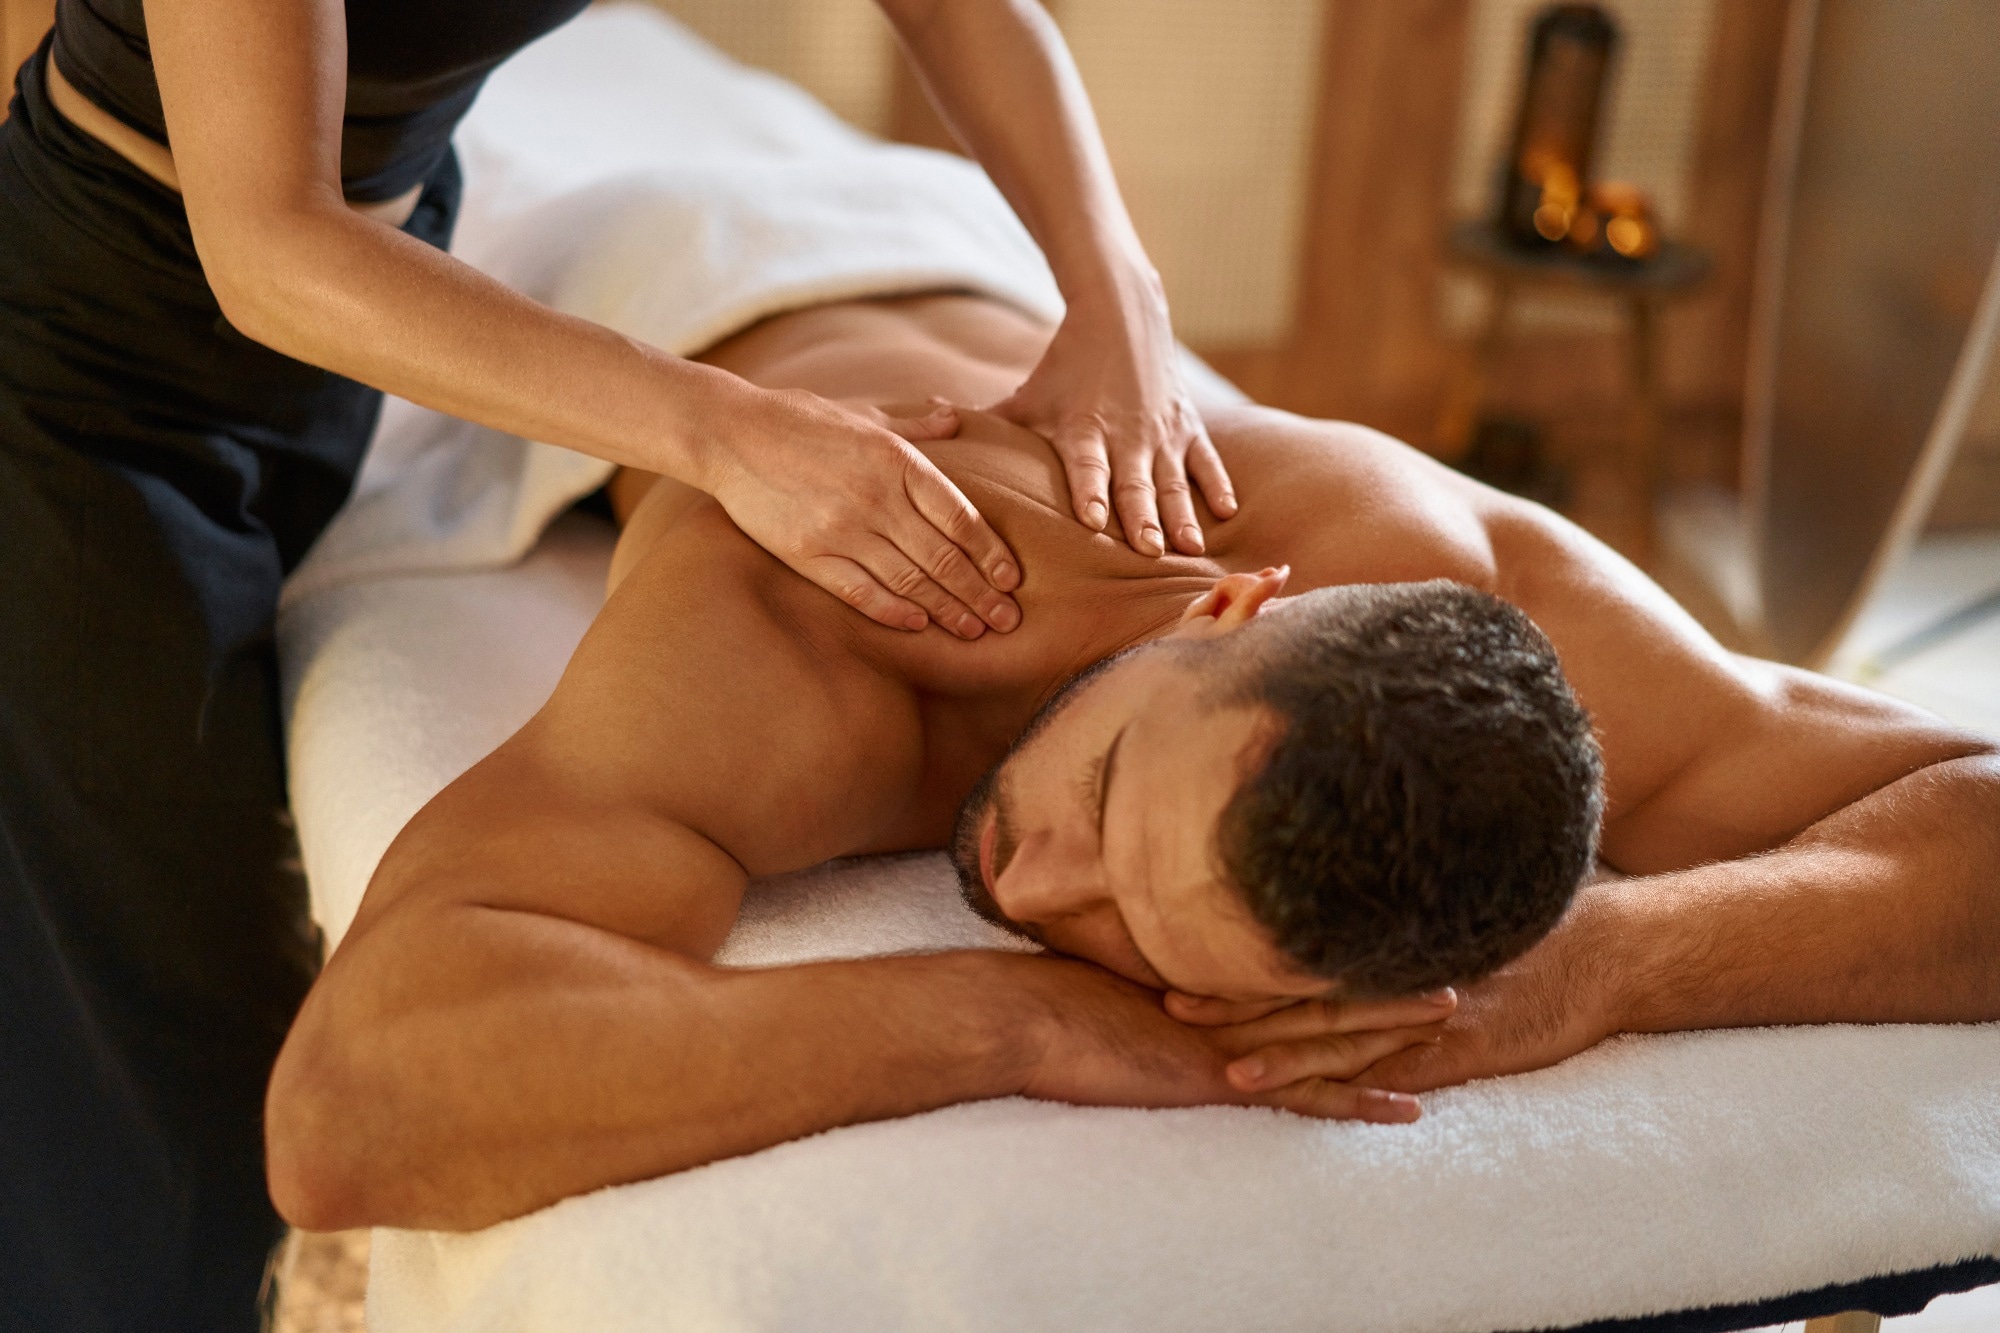 Study finds limited evidence for massage therapy’s effectiveness in pain relief